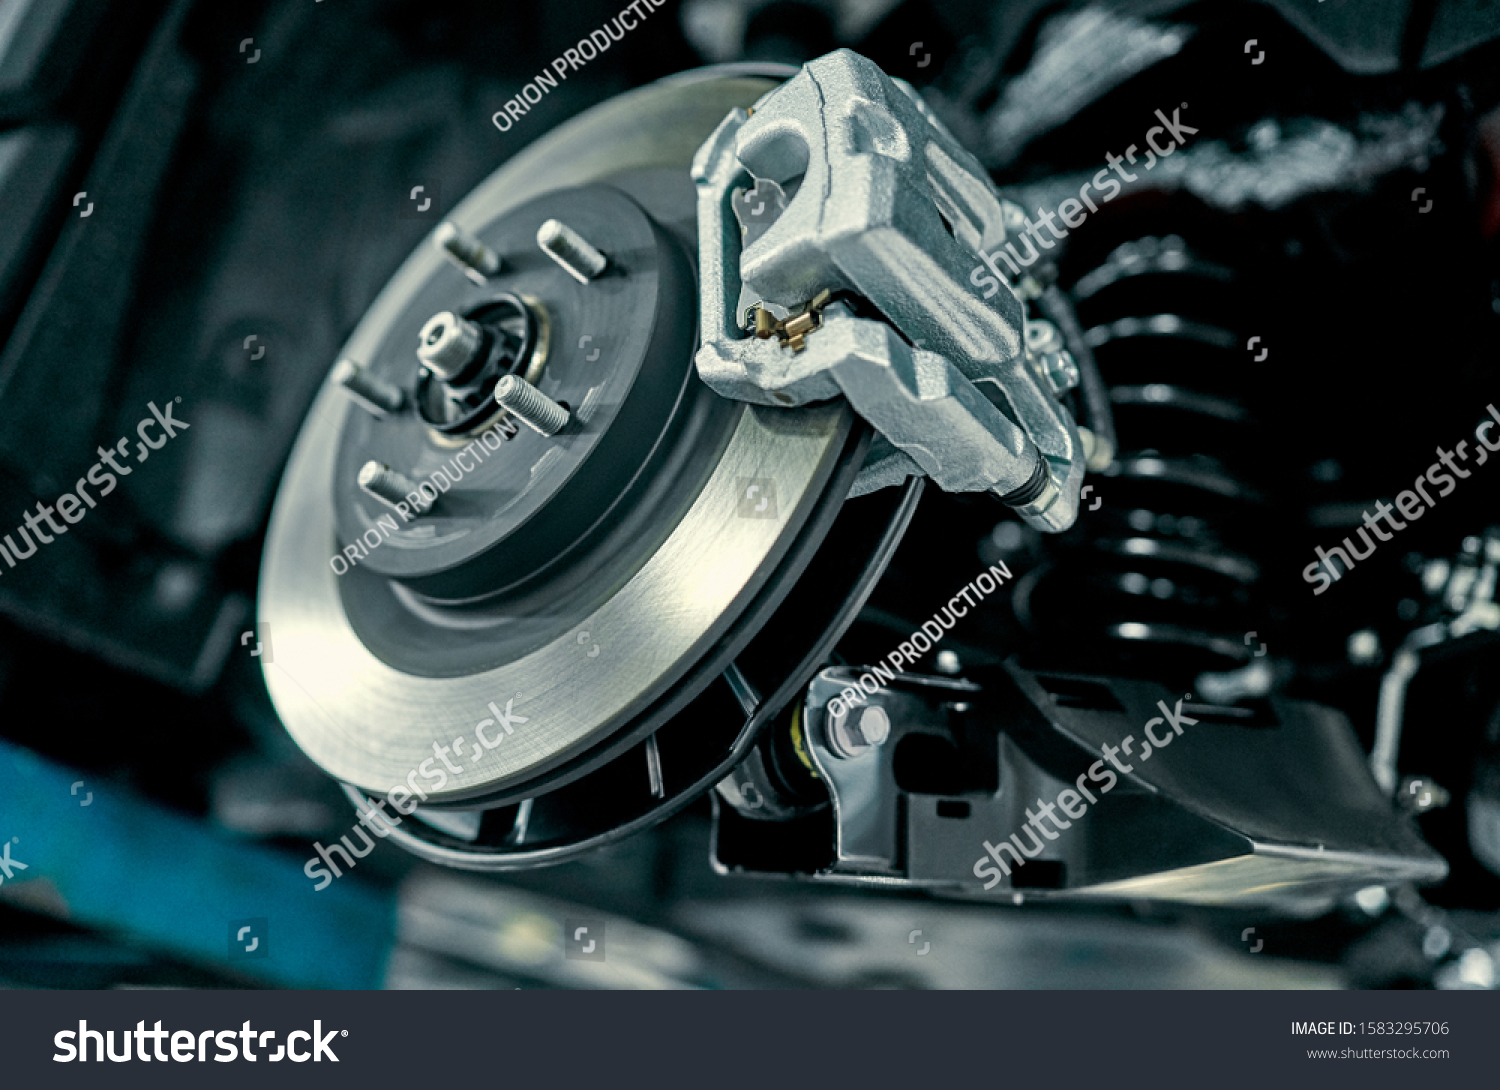 Disc brake of the vehicle for repair, in process of new tire replacement. Car brake repairing in garage.Suspension of car for maintenance brakes and shock absorber systems.Close up. #1583295706